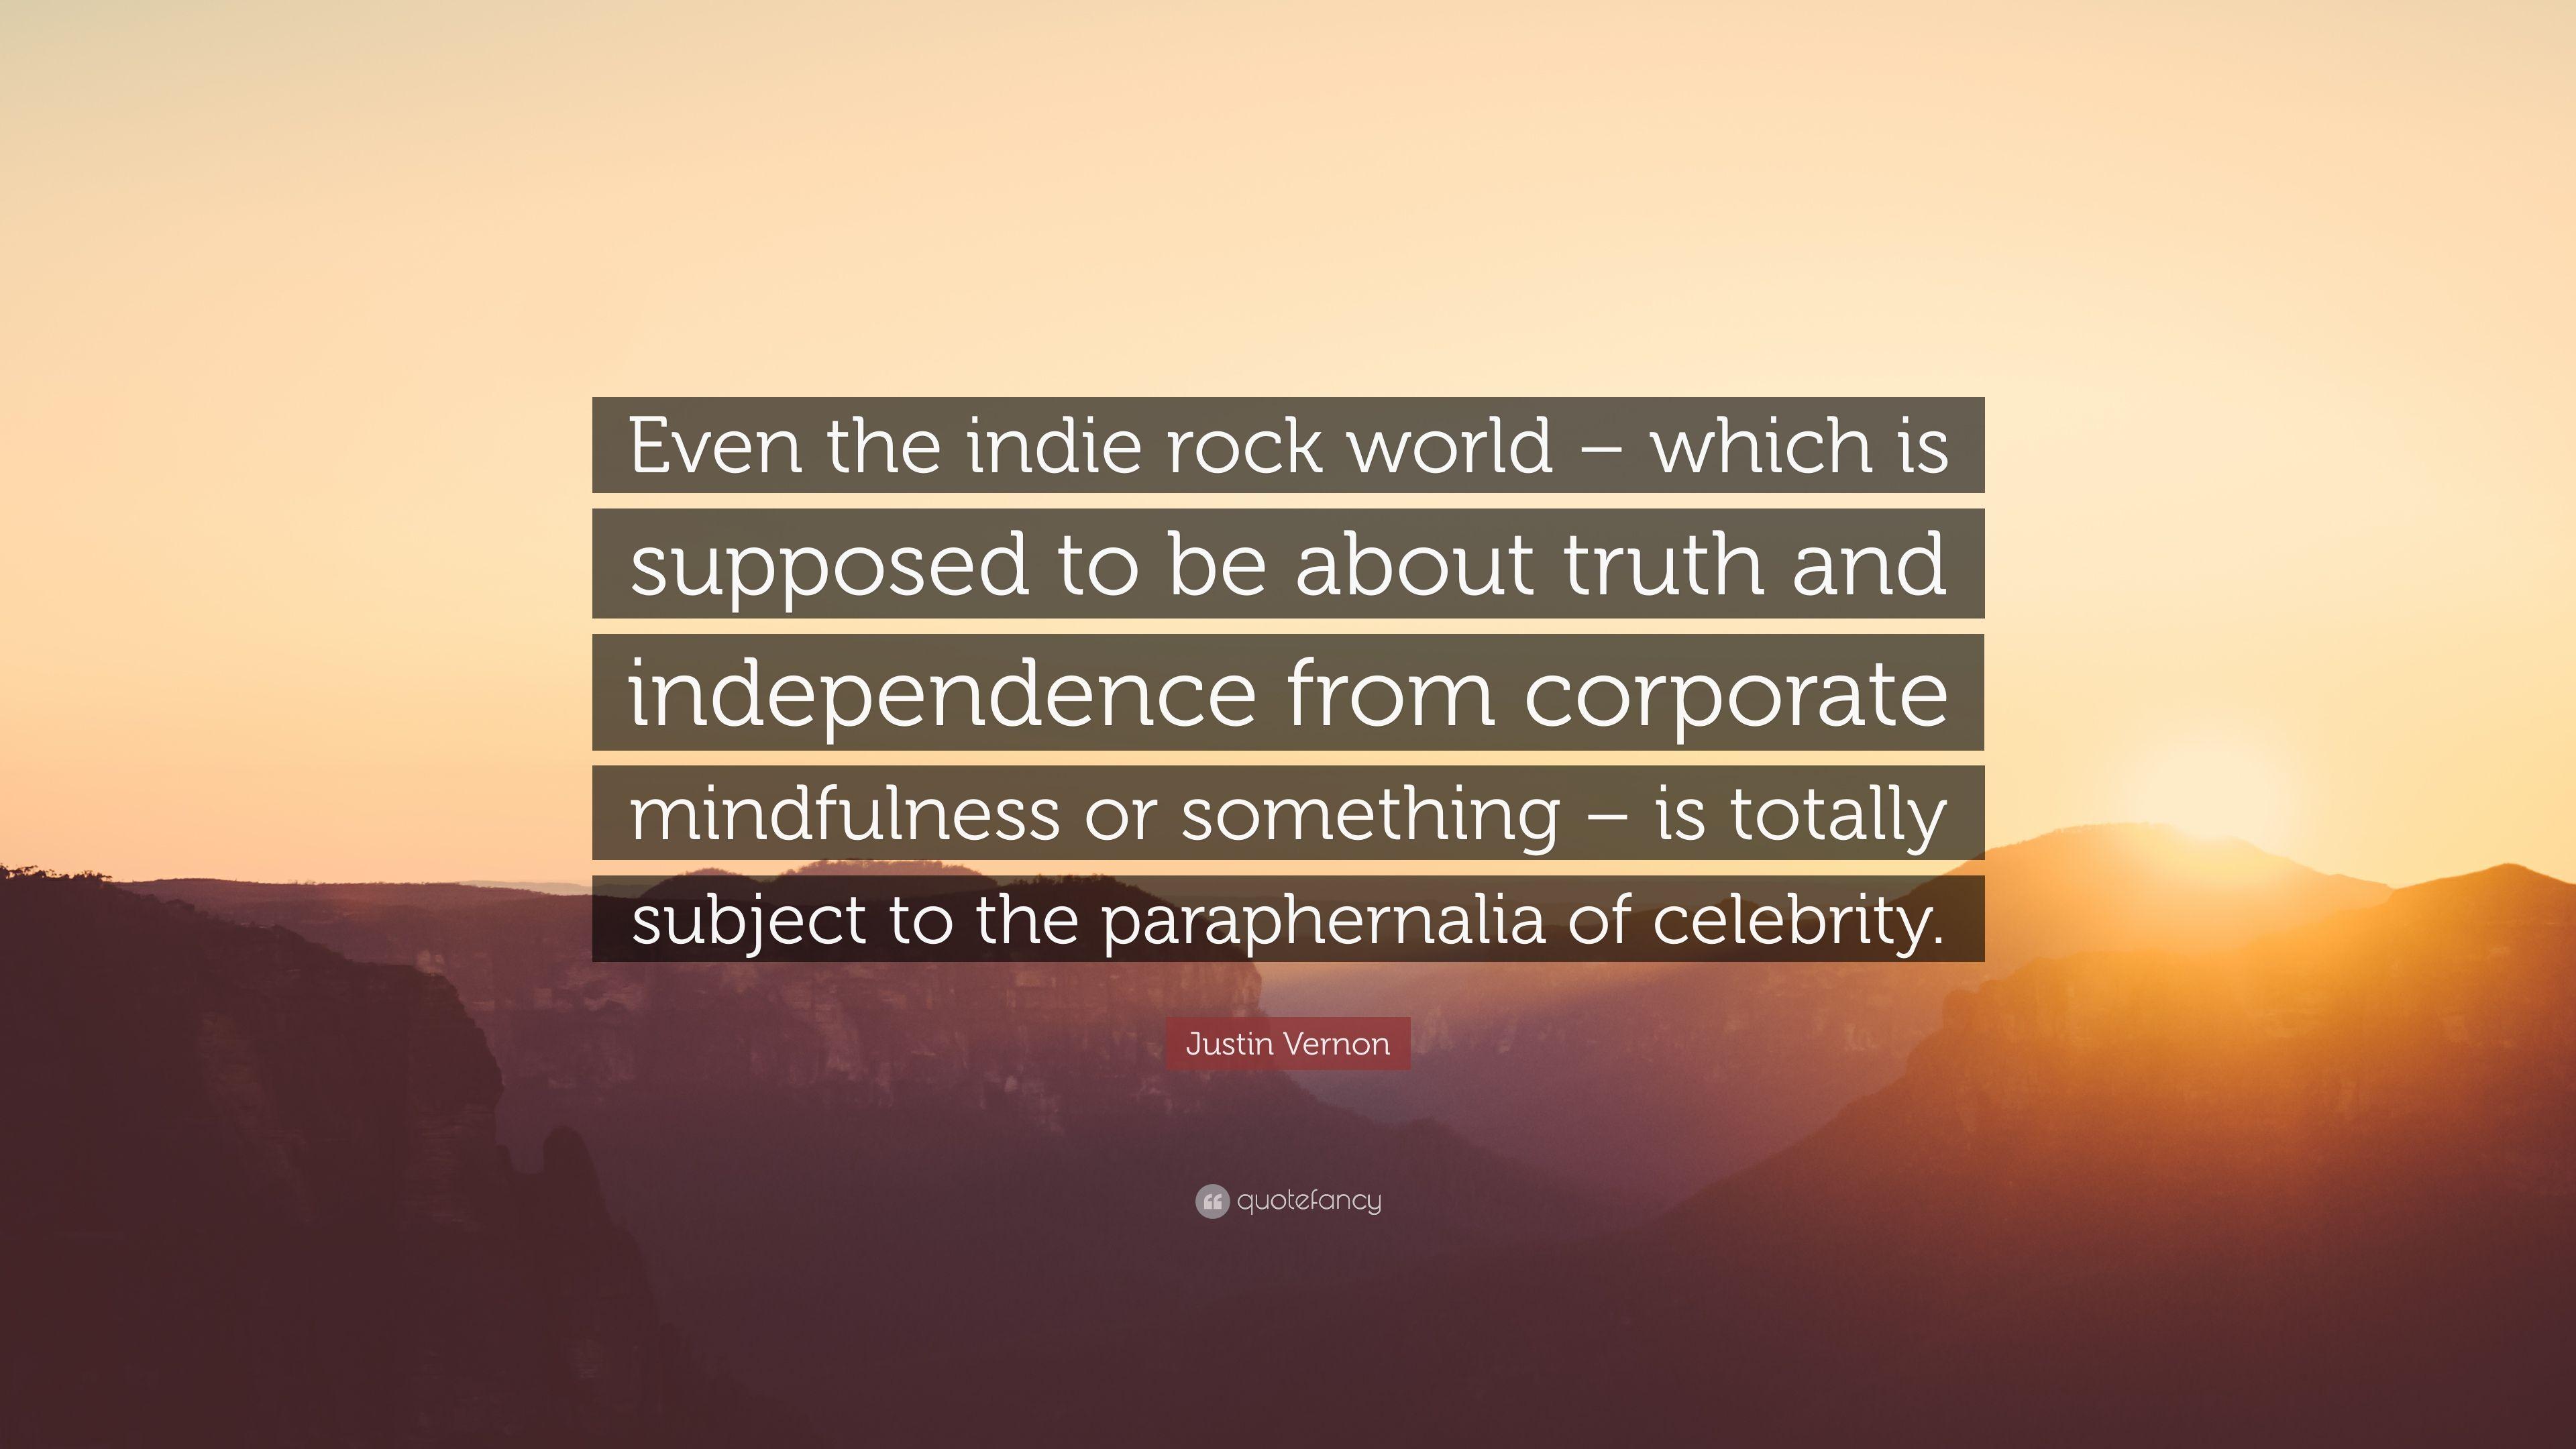 Justin Vernon Quote: “Even the indie rock world